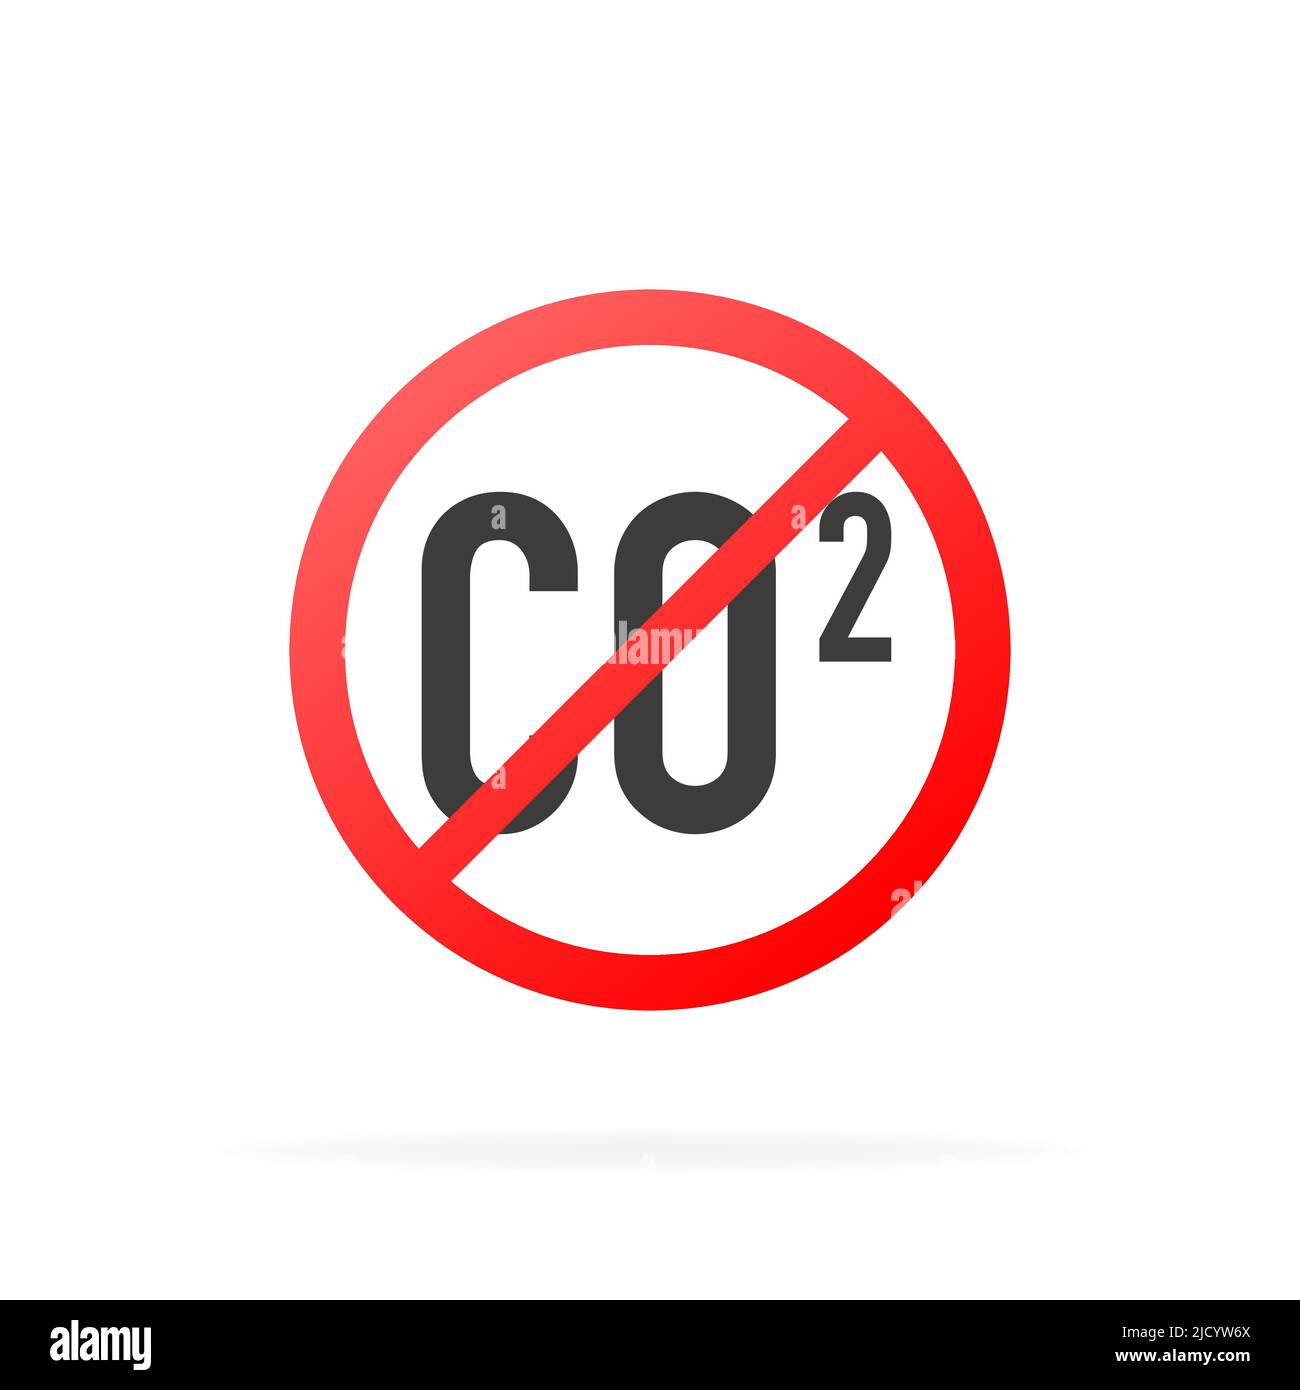 No co2 smog warning sign symbol isolated on a white background. Stock Vector